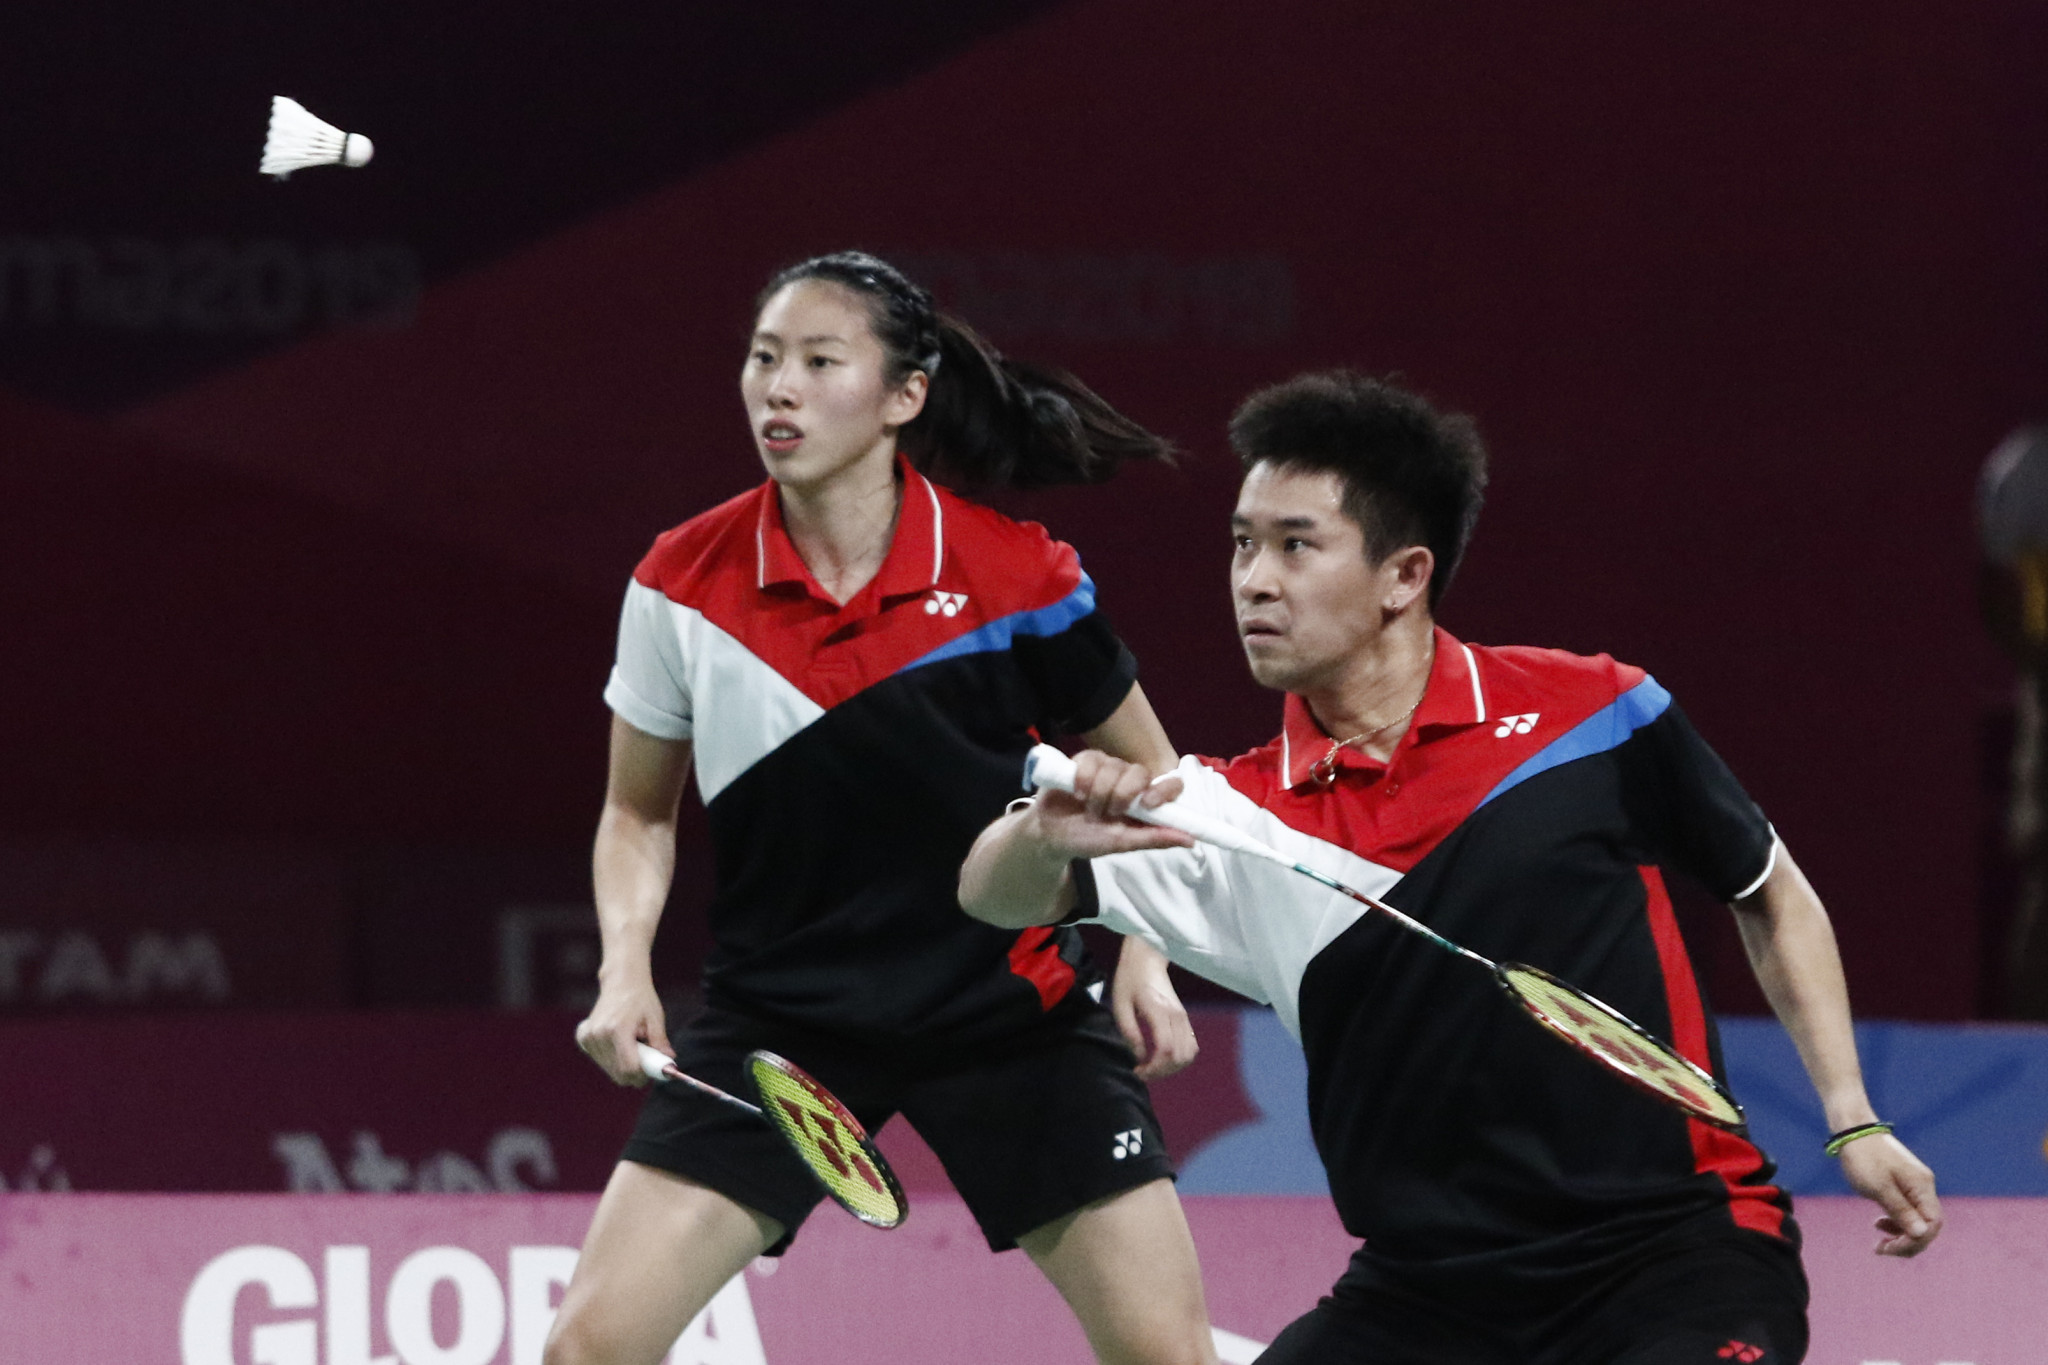 Canada earned four gold medals in badminton at Lima 2019 ©Lima 2019